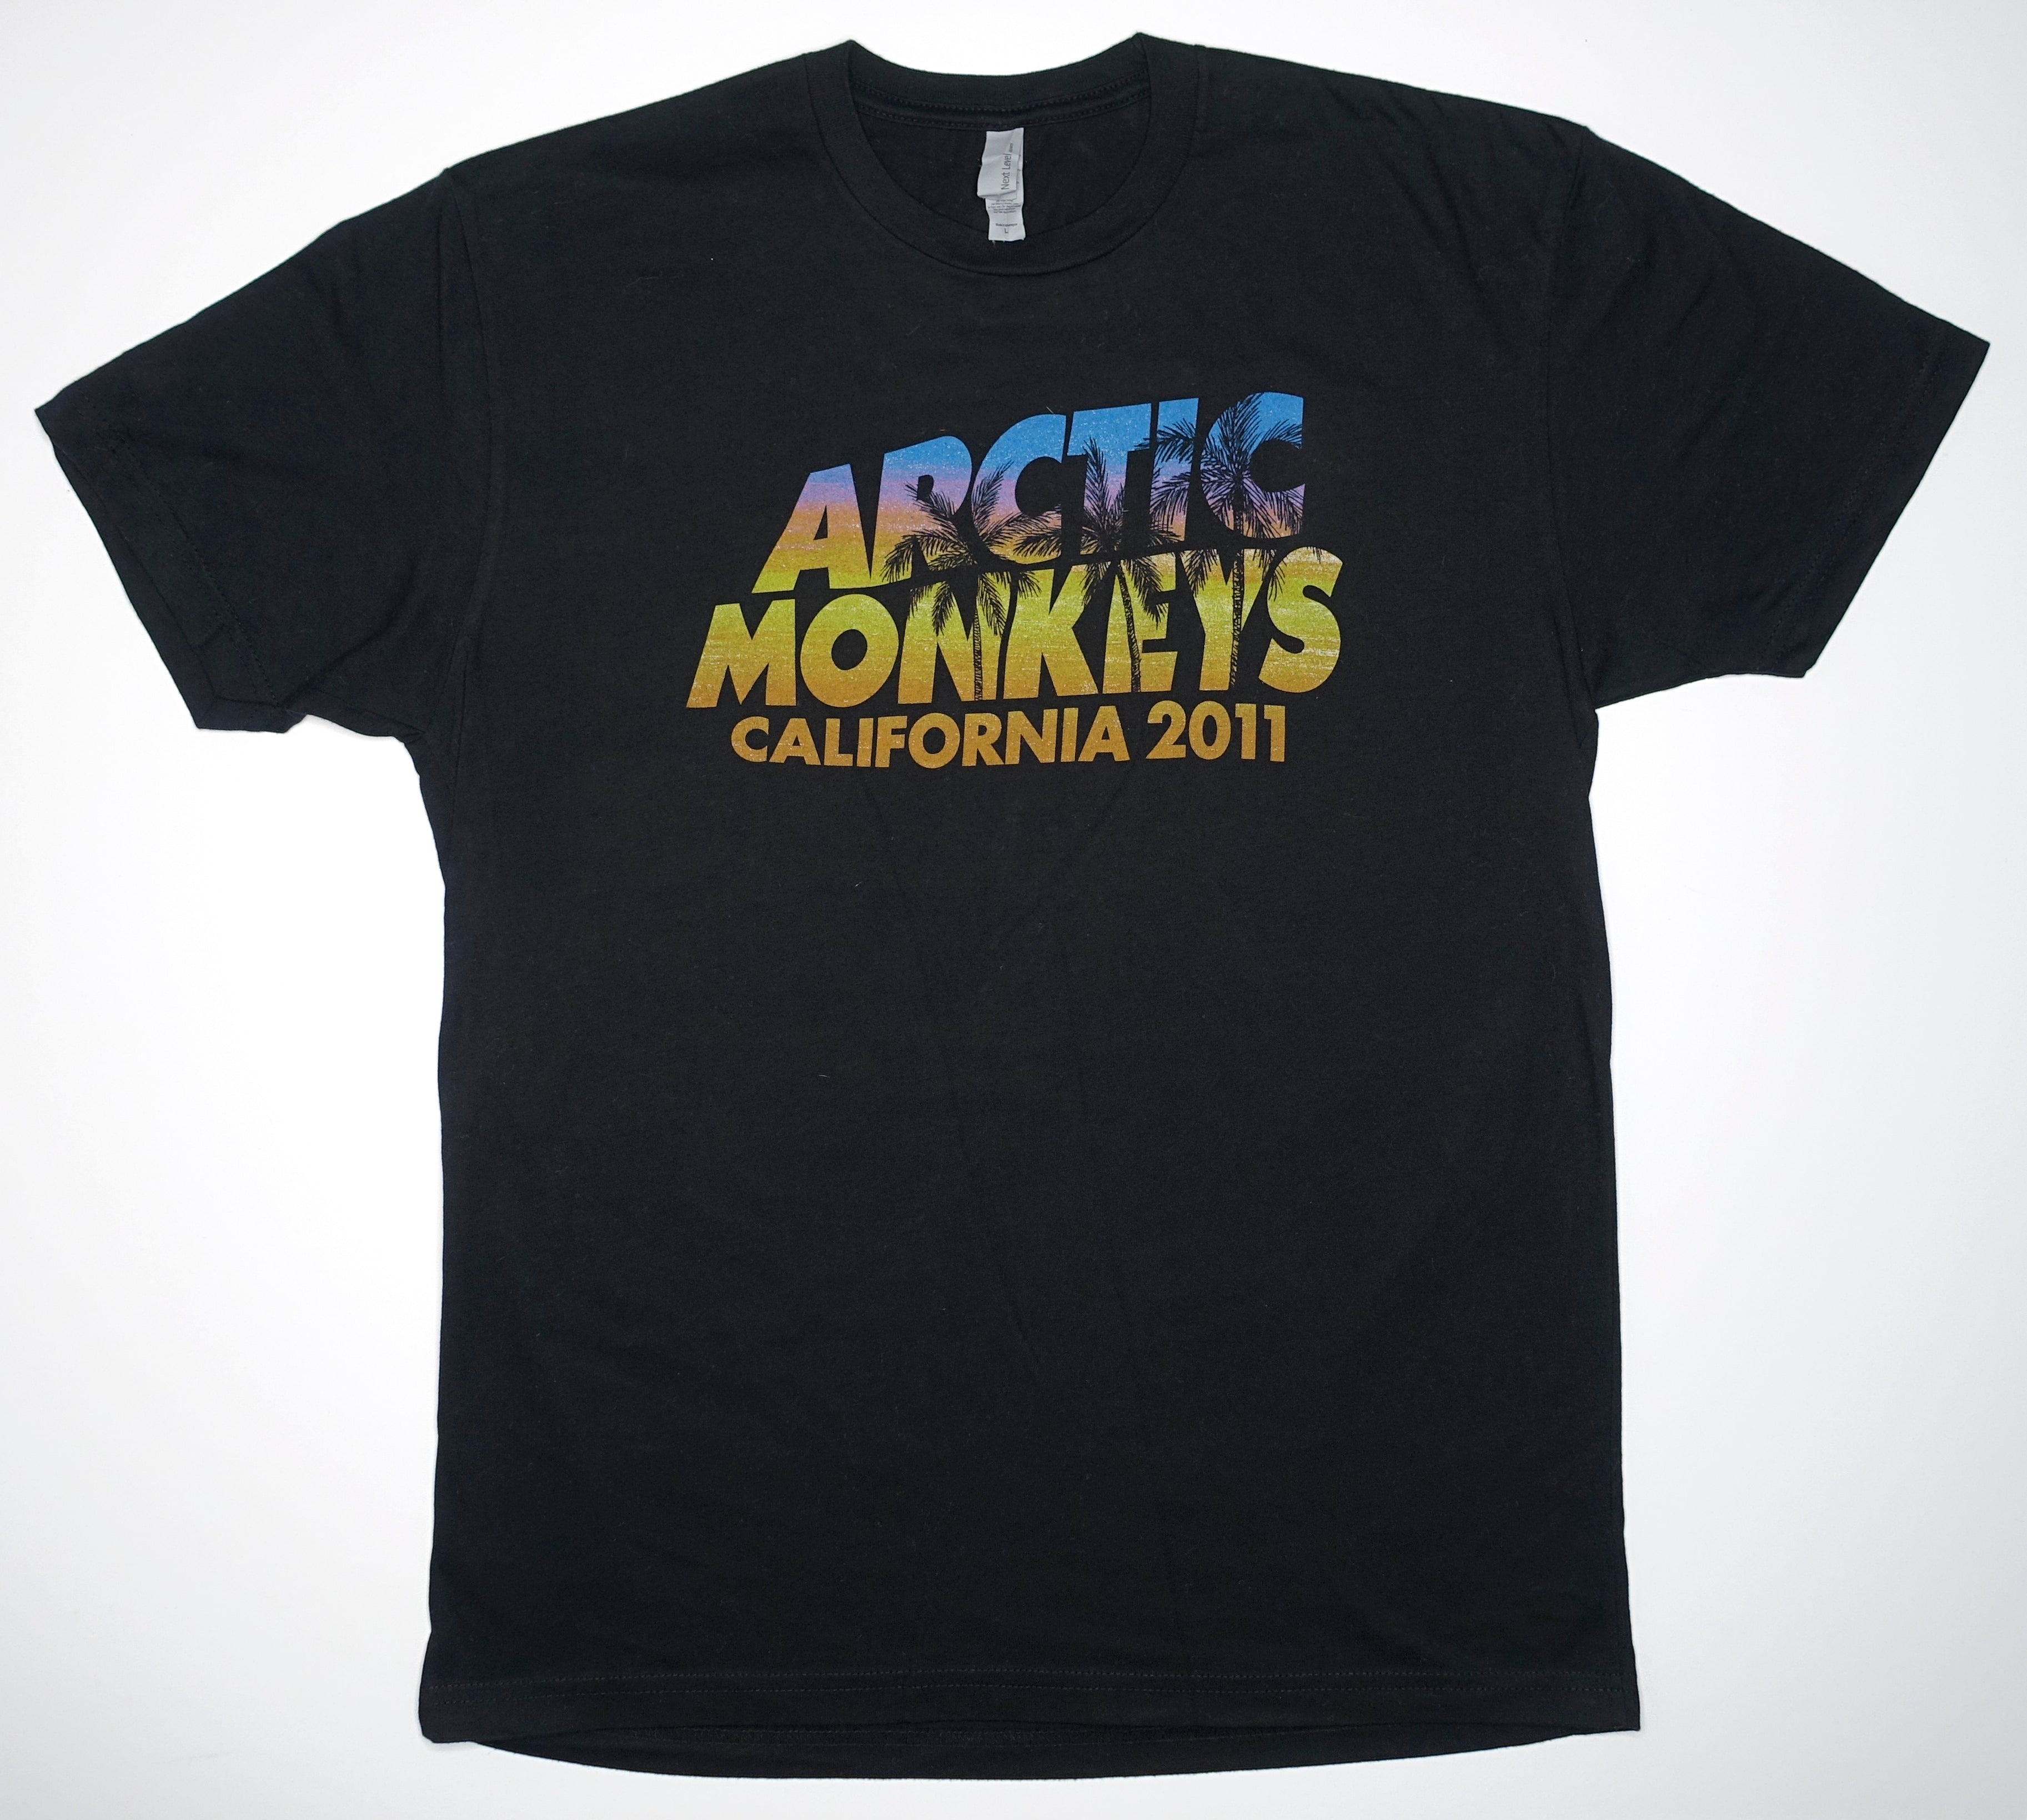 Arctic Monkeys - California 2011 / Suck It And See Tour Shirt Size Large